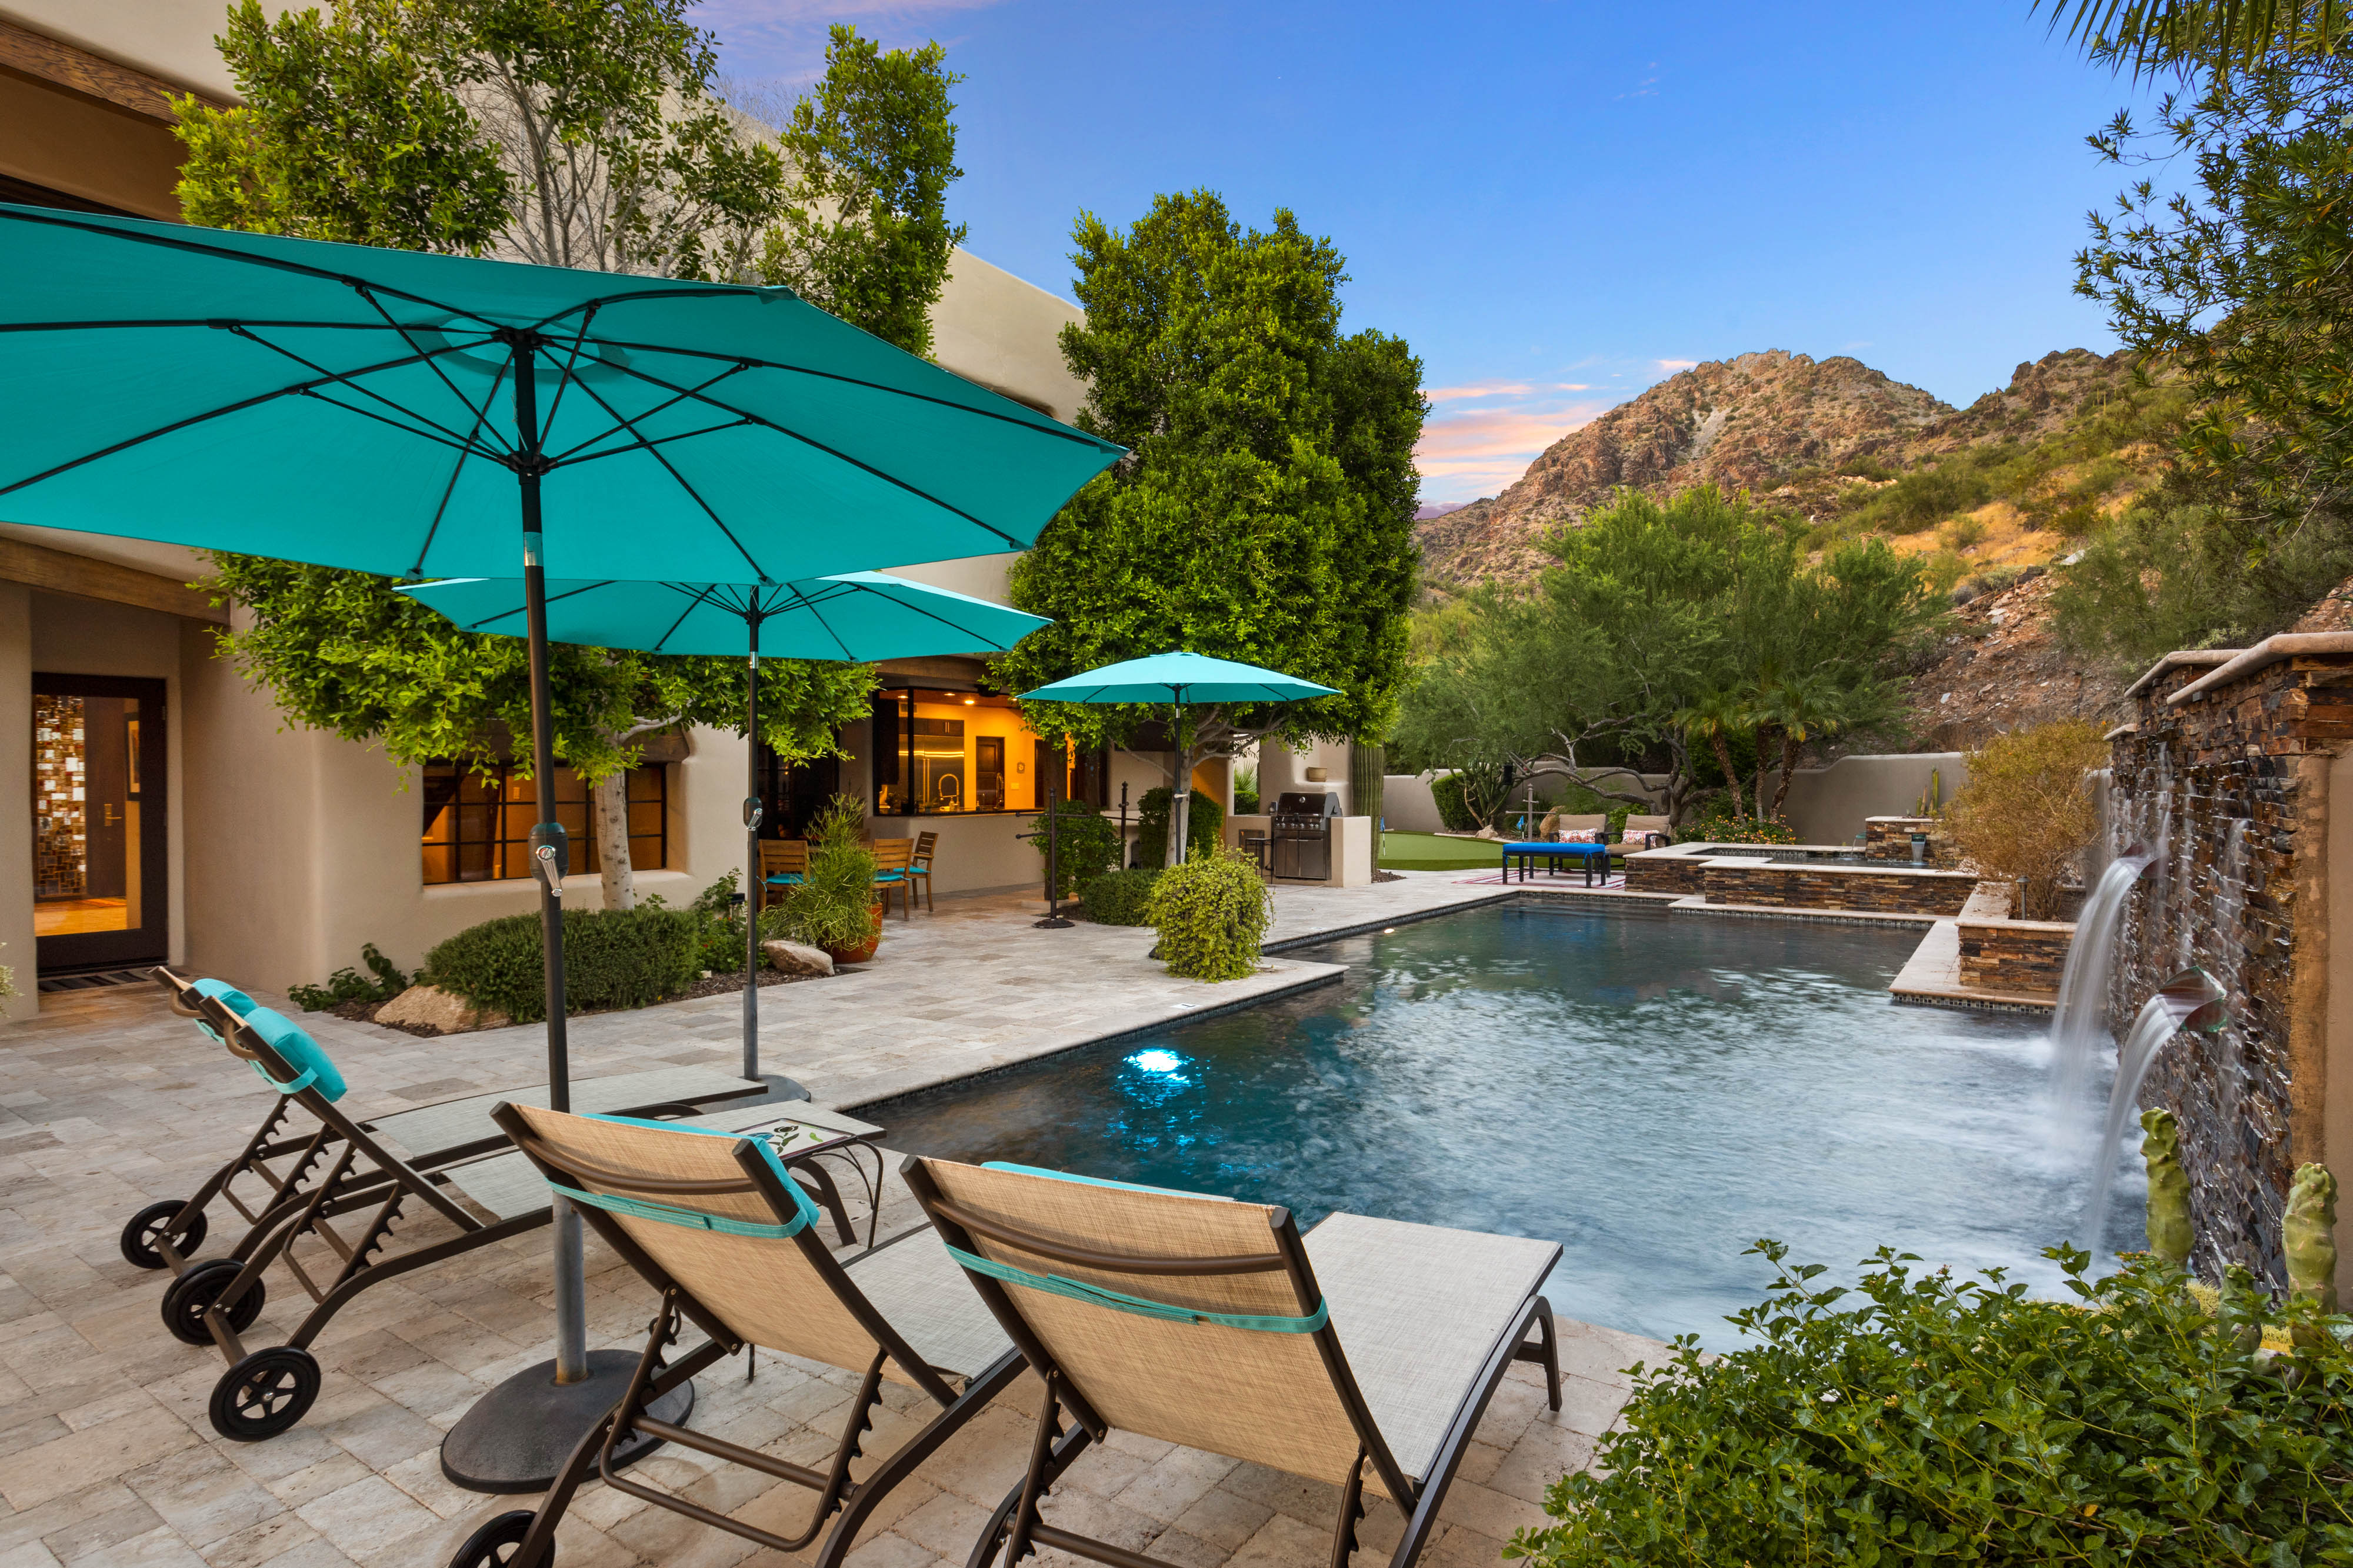 Relax By The Pristine Poolside w/ Views in Background!